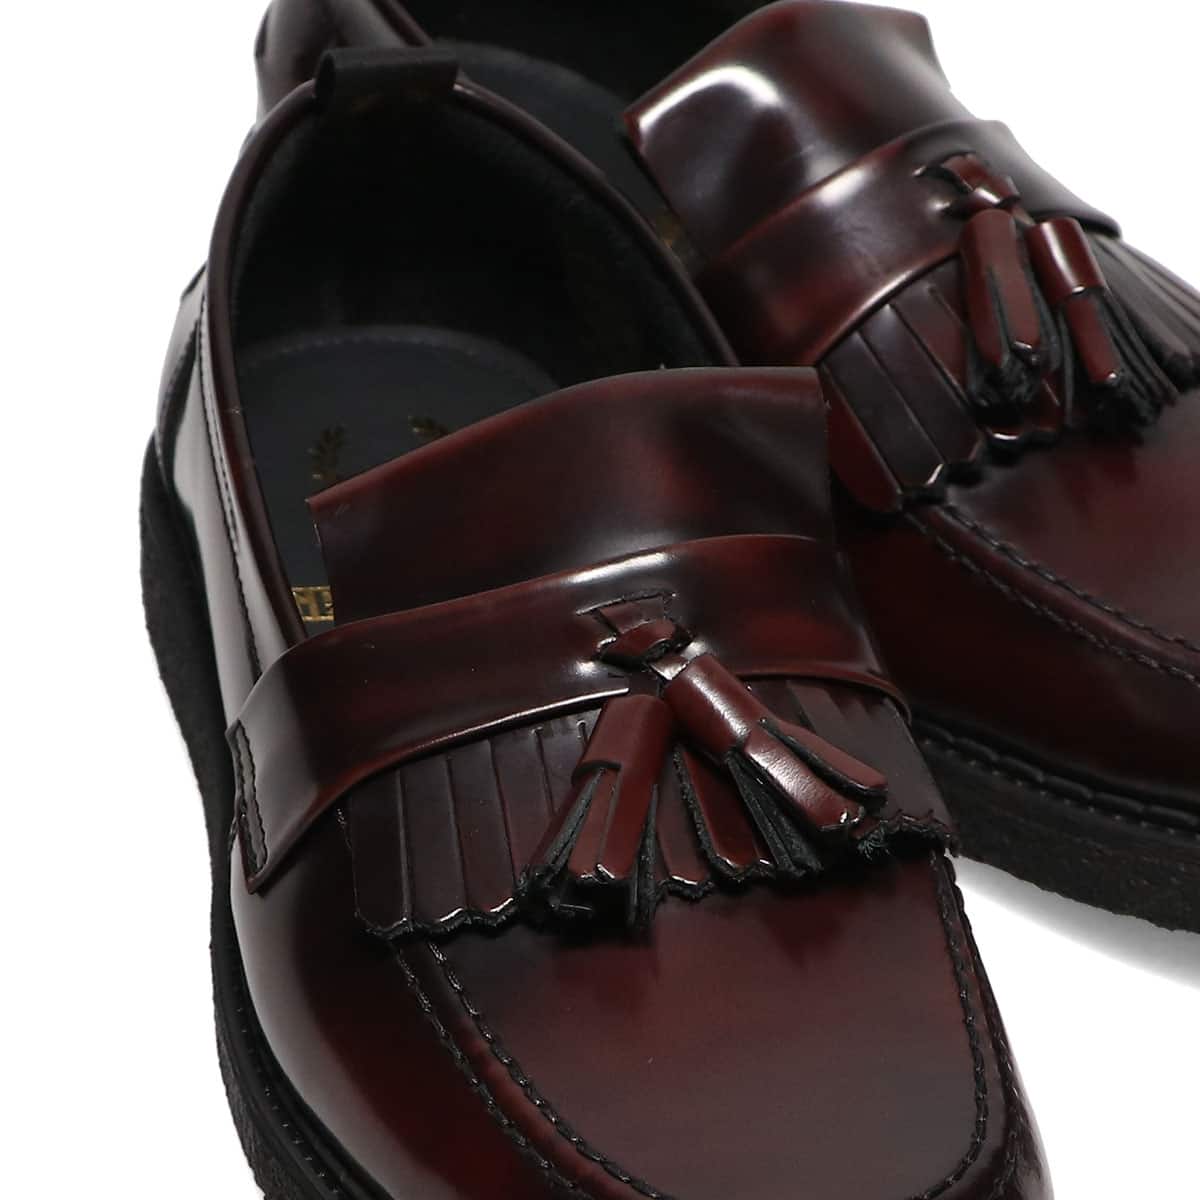 FRED PERRY × GEORGE COX TASSEL LOAFER OX BLOOD 20FA-I